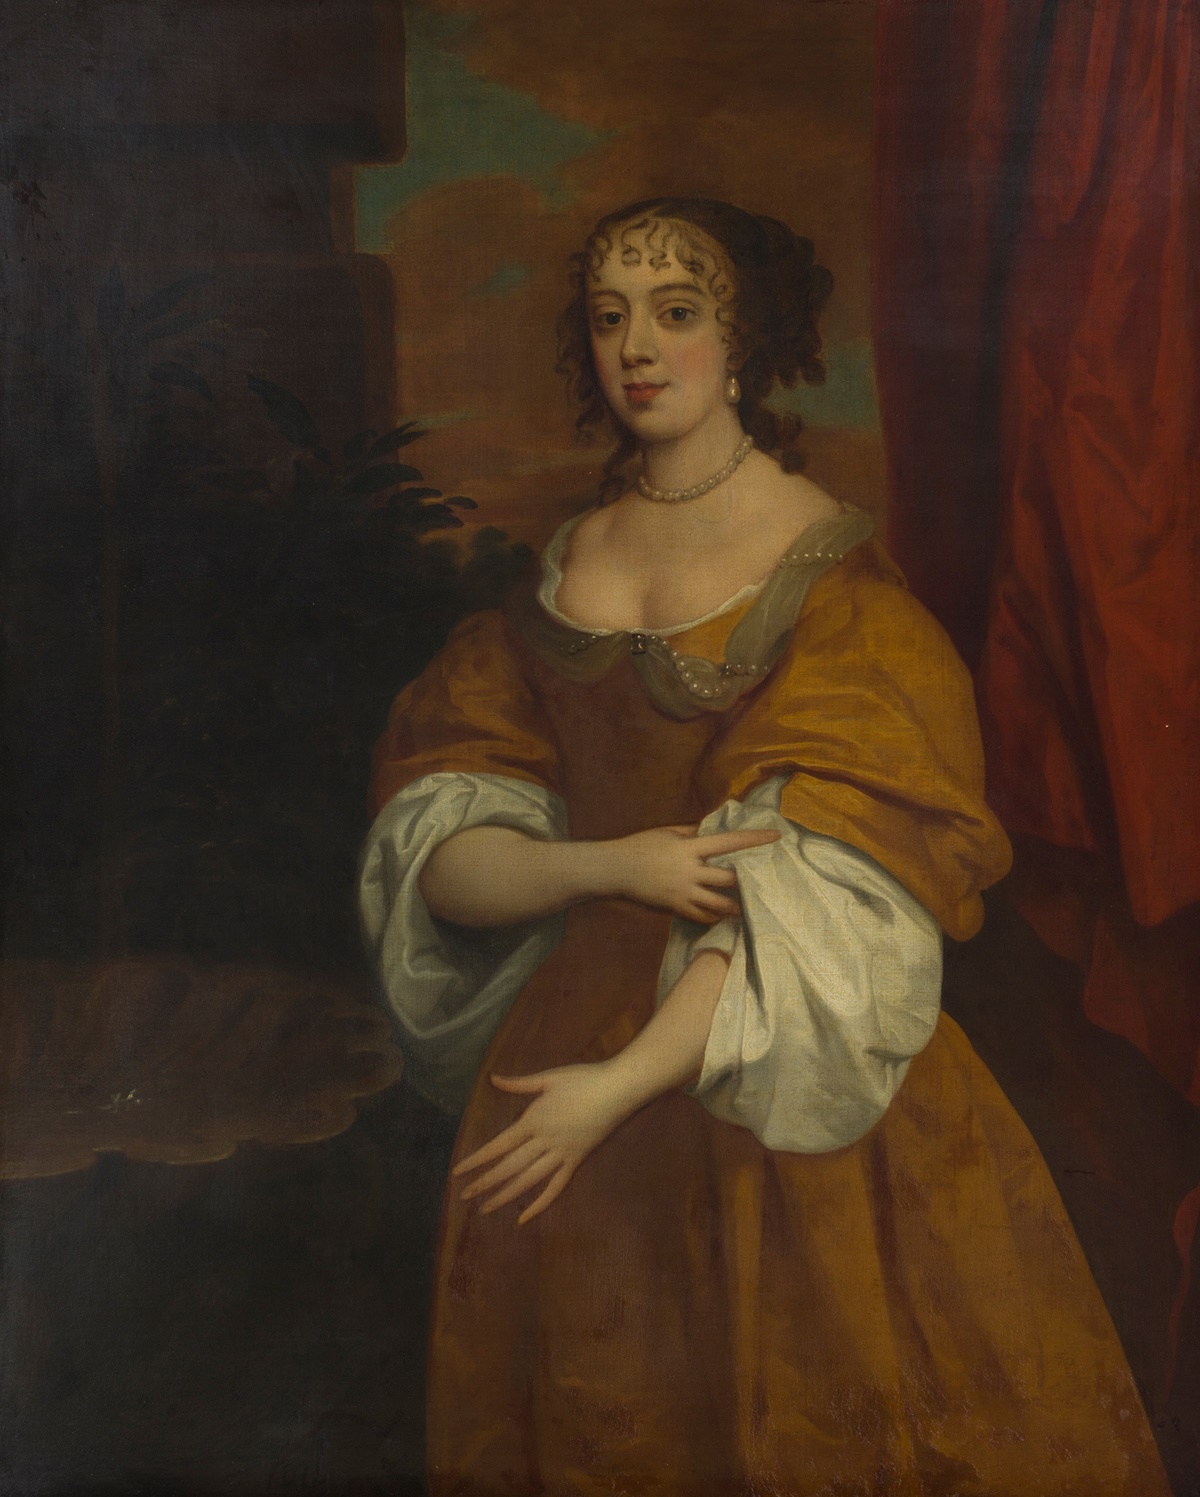 LOT 86 | FOLLOWER OF SIR PETER LELY | THREE QUARTER LENGTH PORTRAIT OF A LADY | £2,000 - £3,000 + fees